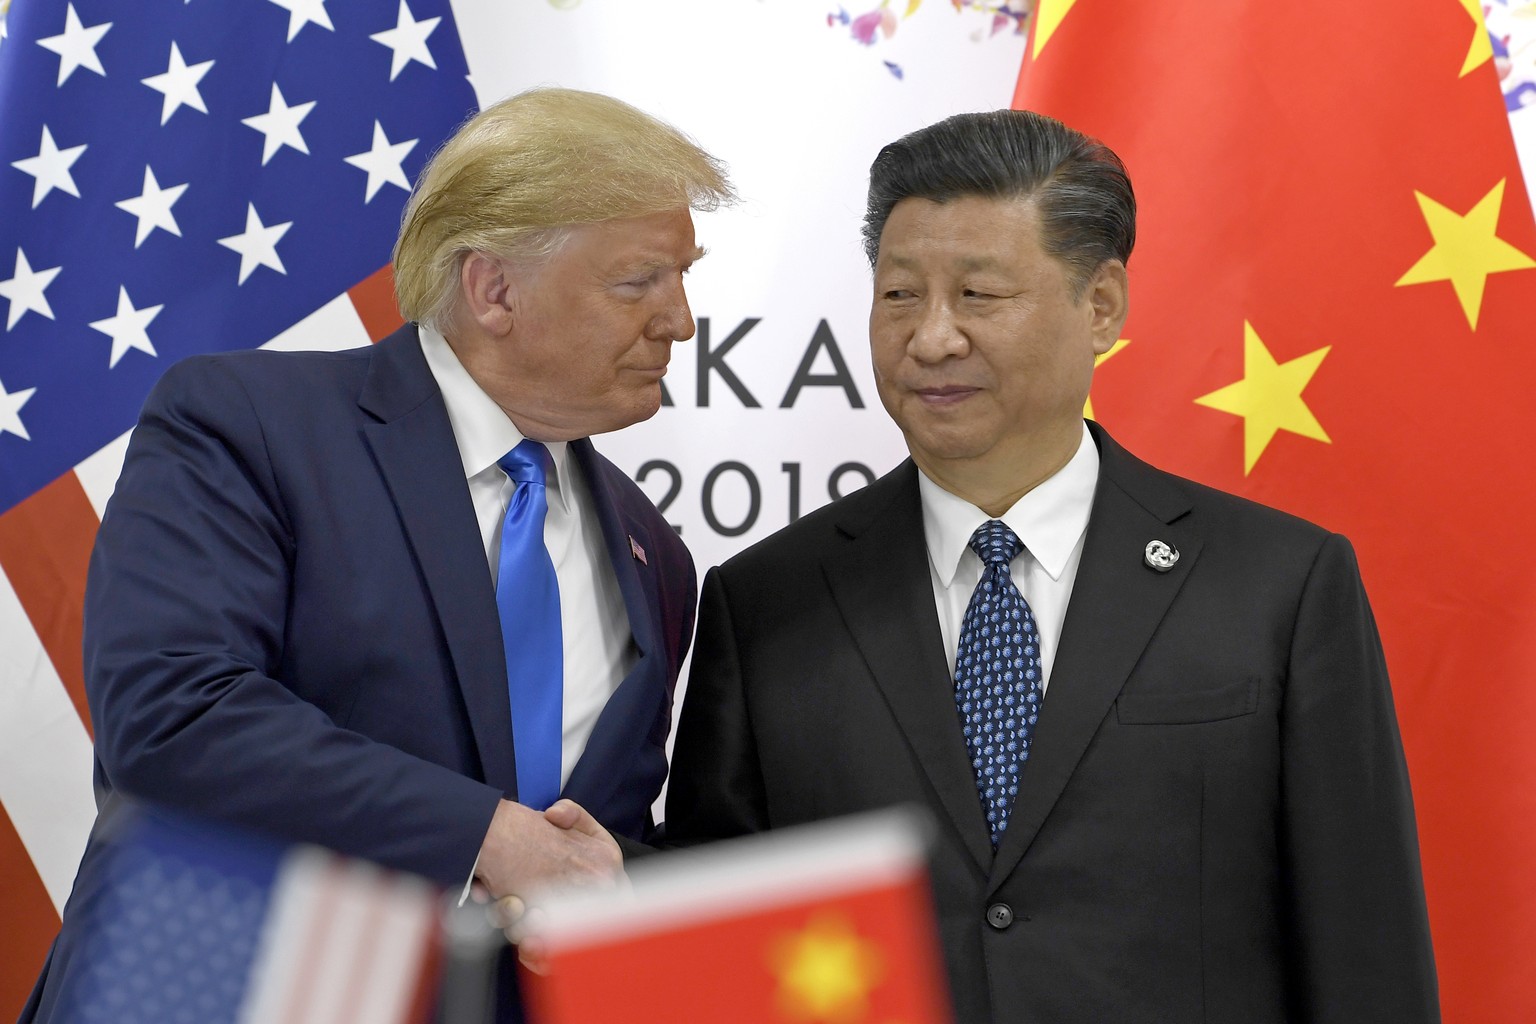 President Donald Trump, left, shakes hands with Chinese President Xi Jinping during a meeting on the sidelines of the G-20 summit in Osaka, Japan, Saturday, June 29, 2019. (AP Photo/Susan Walsh)
Donal ...